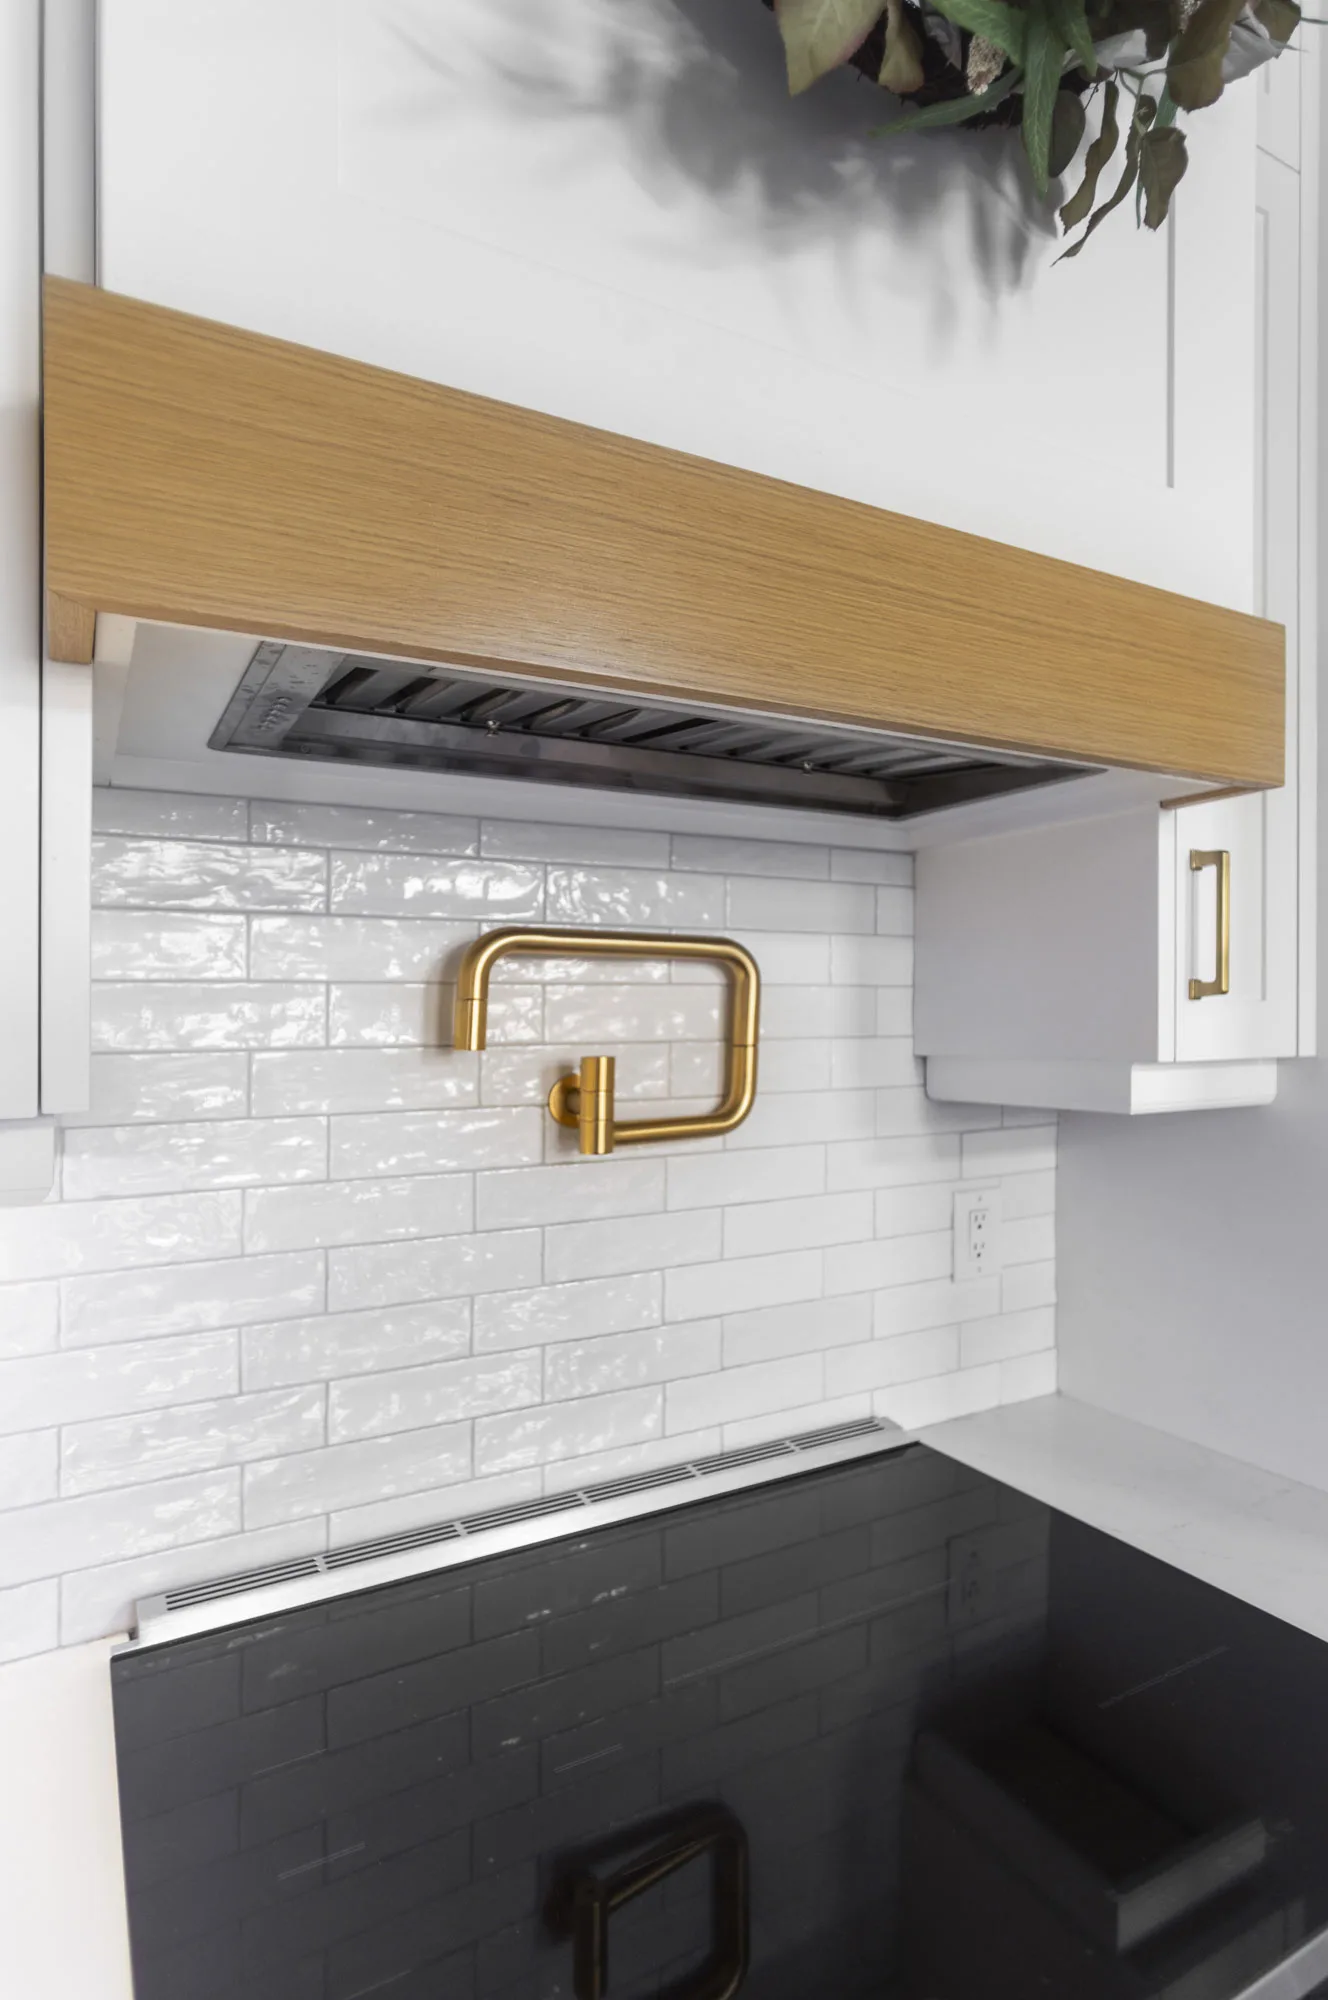 Close up a stove top with white back splash and gold water spout